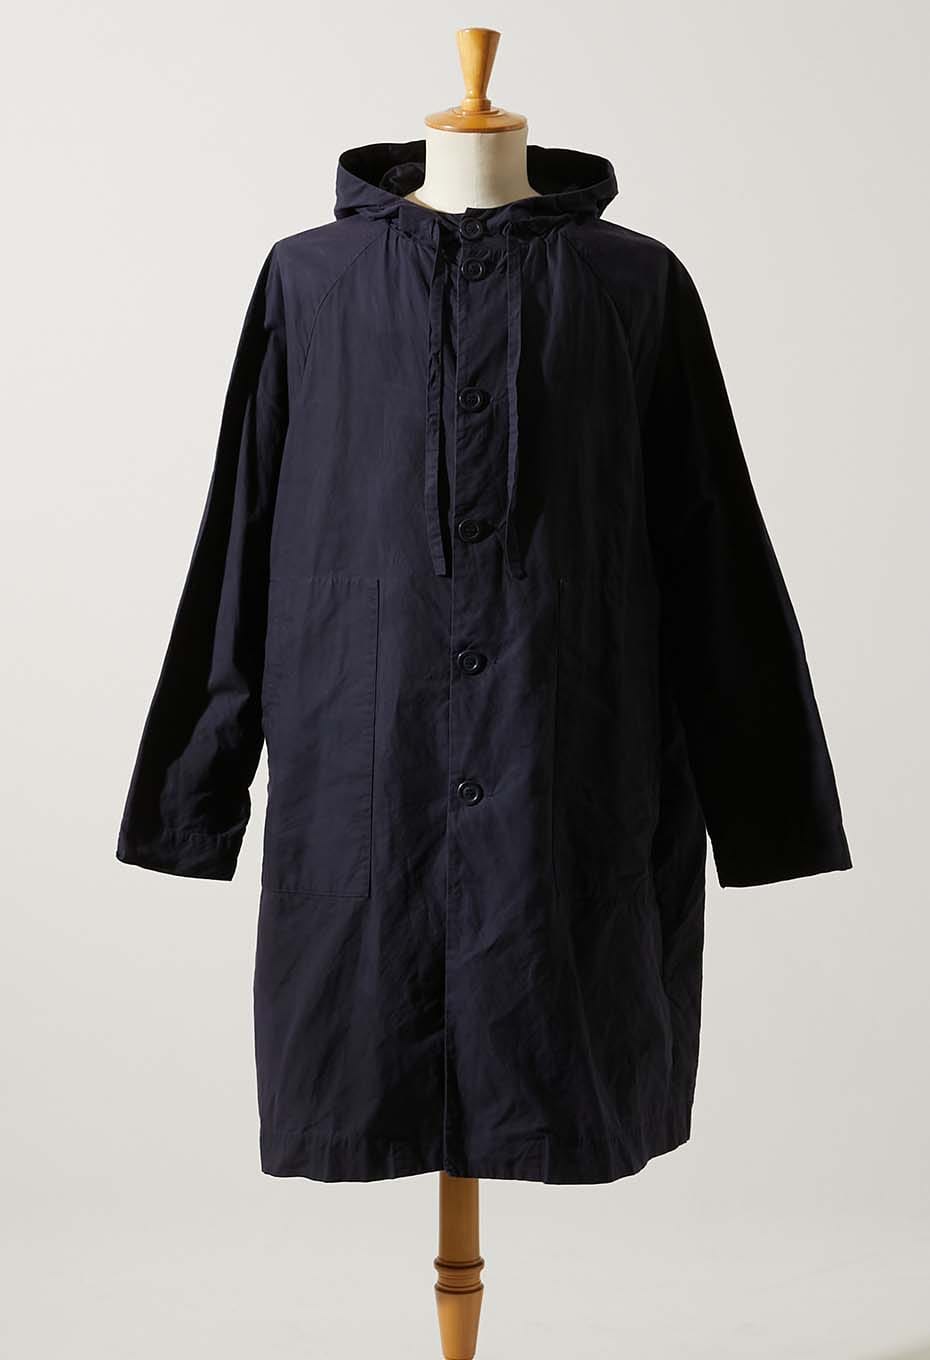 CASEY CASEY|ロングコート|CASEY CASEY ANVERS PARKA /LWAX 21HM161